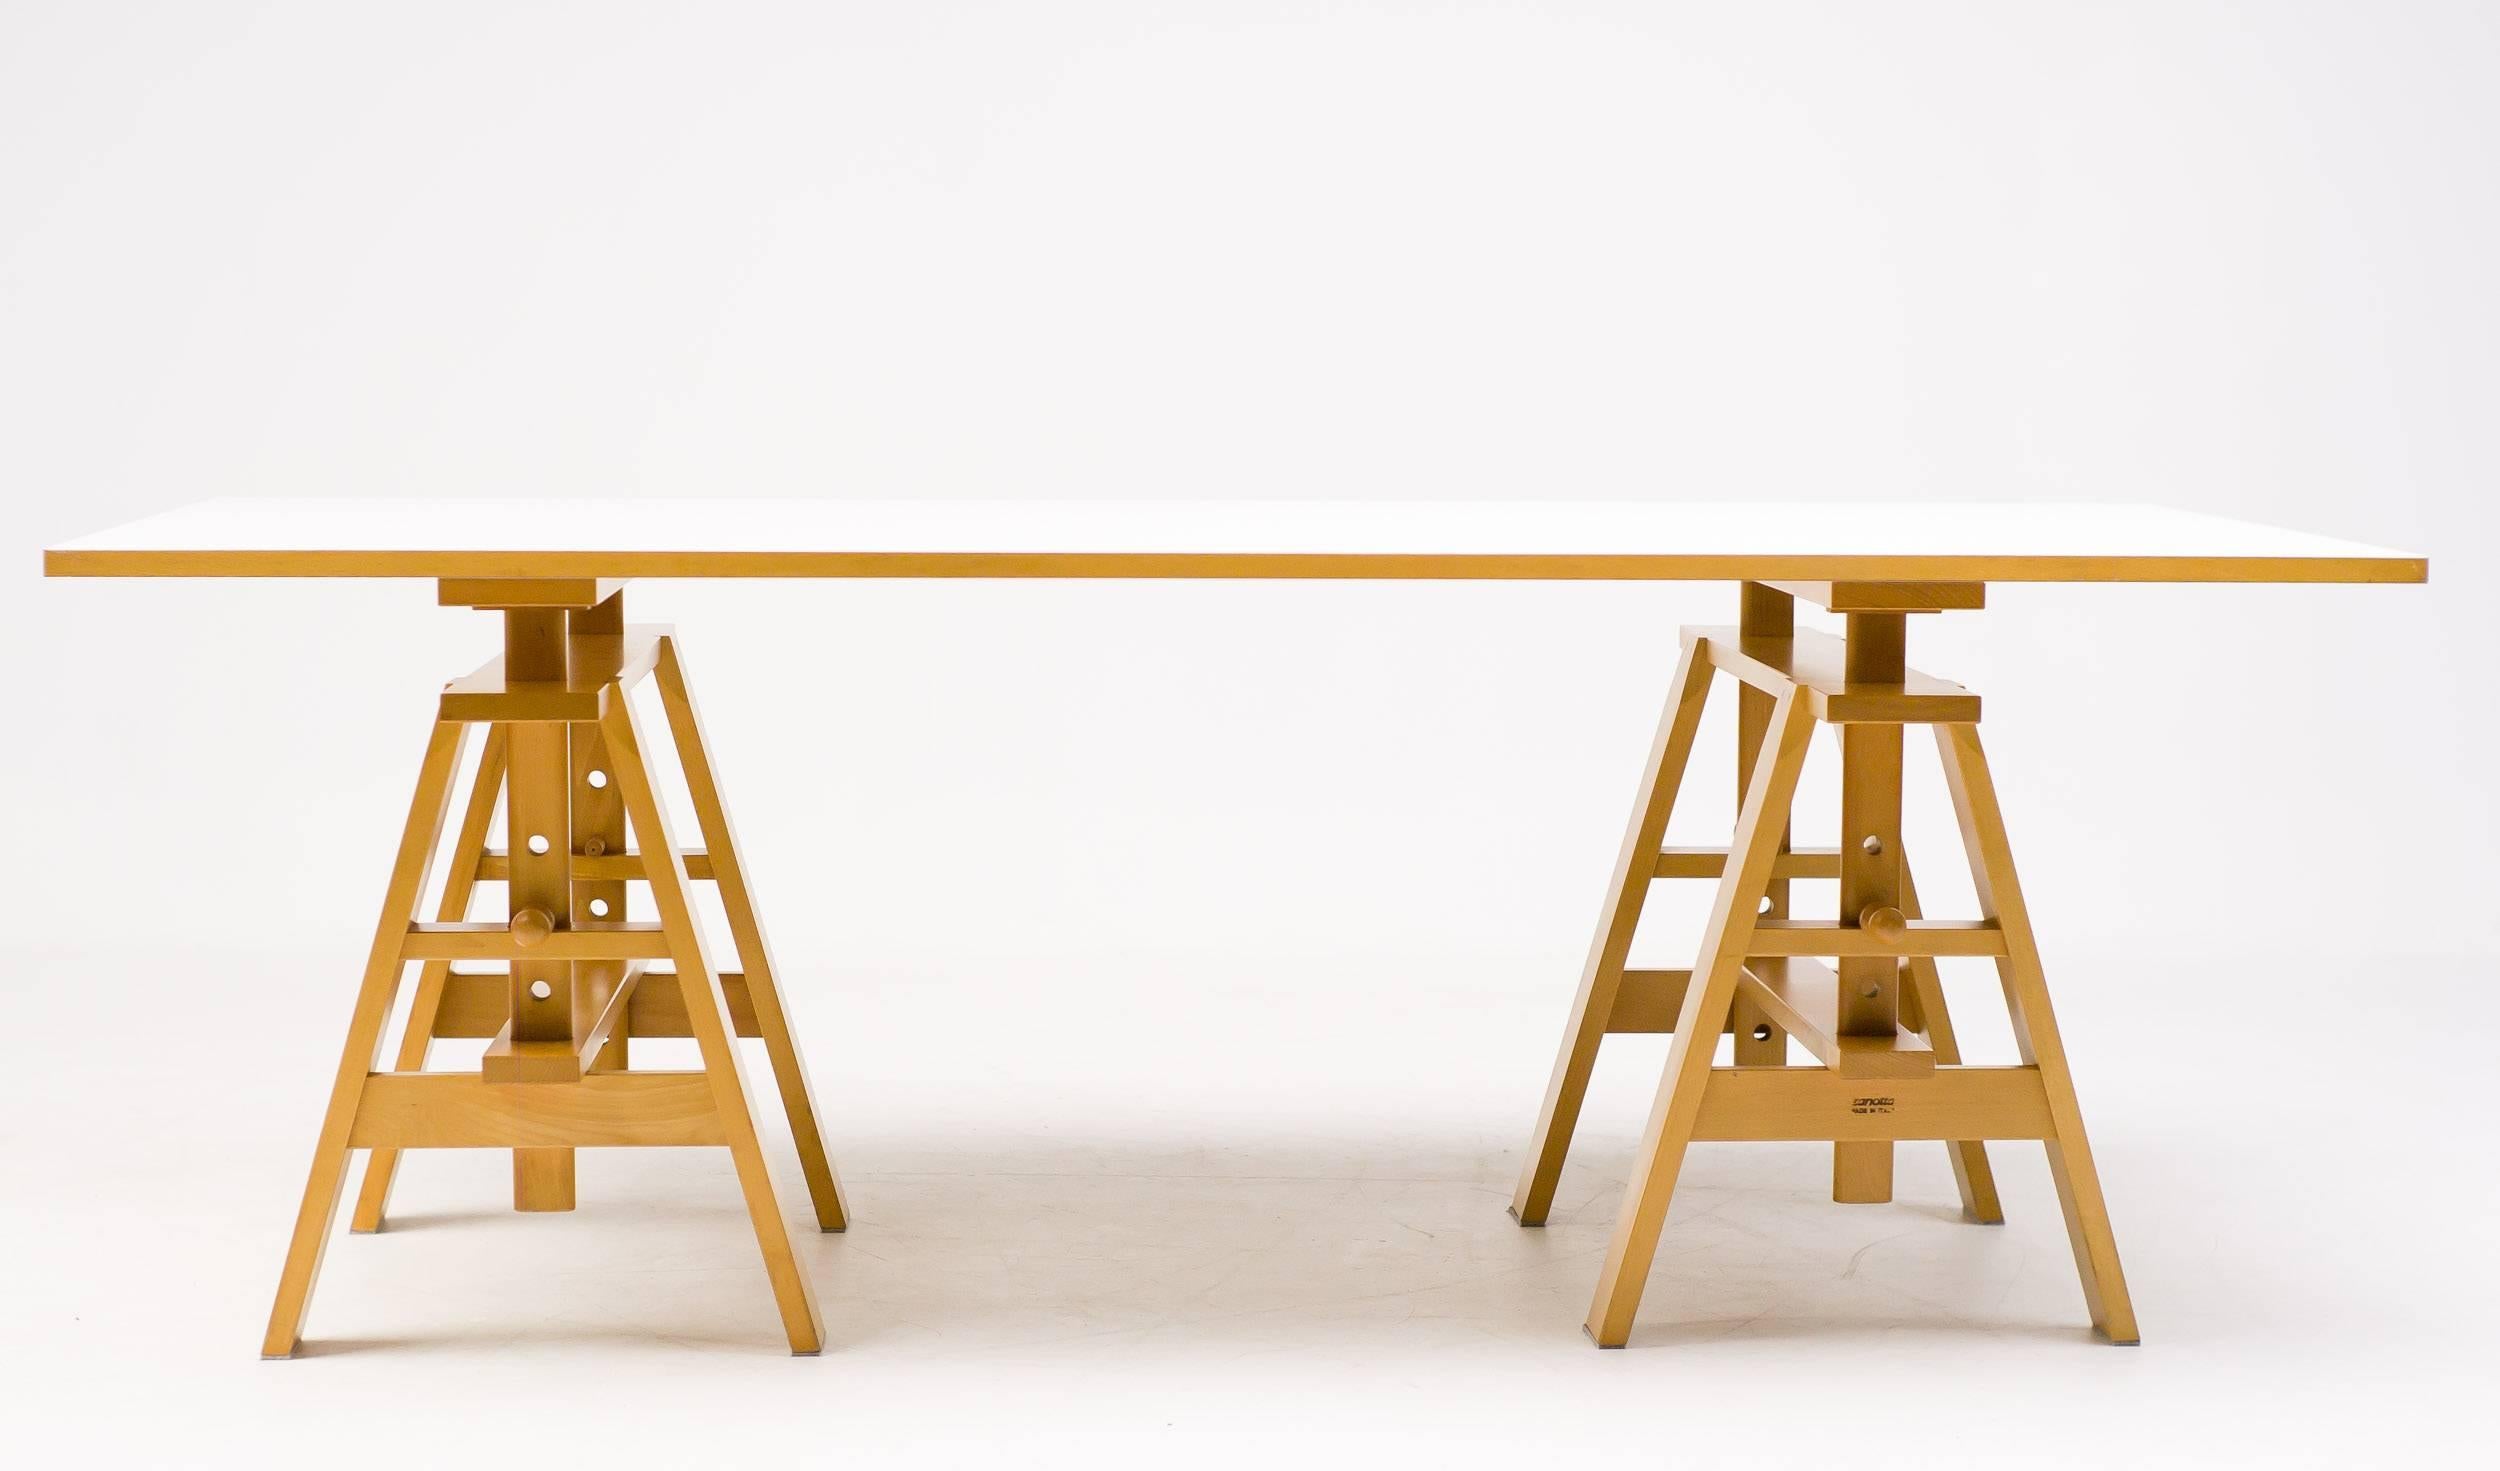 Design Achille Castiglioni, originally designed in 1950, put into production from 1969 onward by Zanotta
Steam-treated beech trestle, particleboard top
Made in Italy by Zanotta

Leonardo table was inspired by and named after Leonardo Da